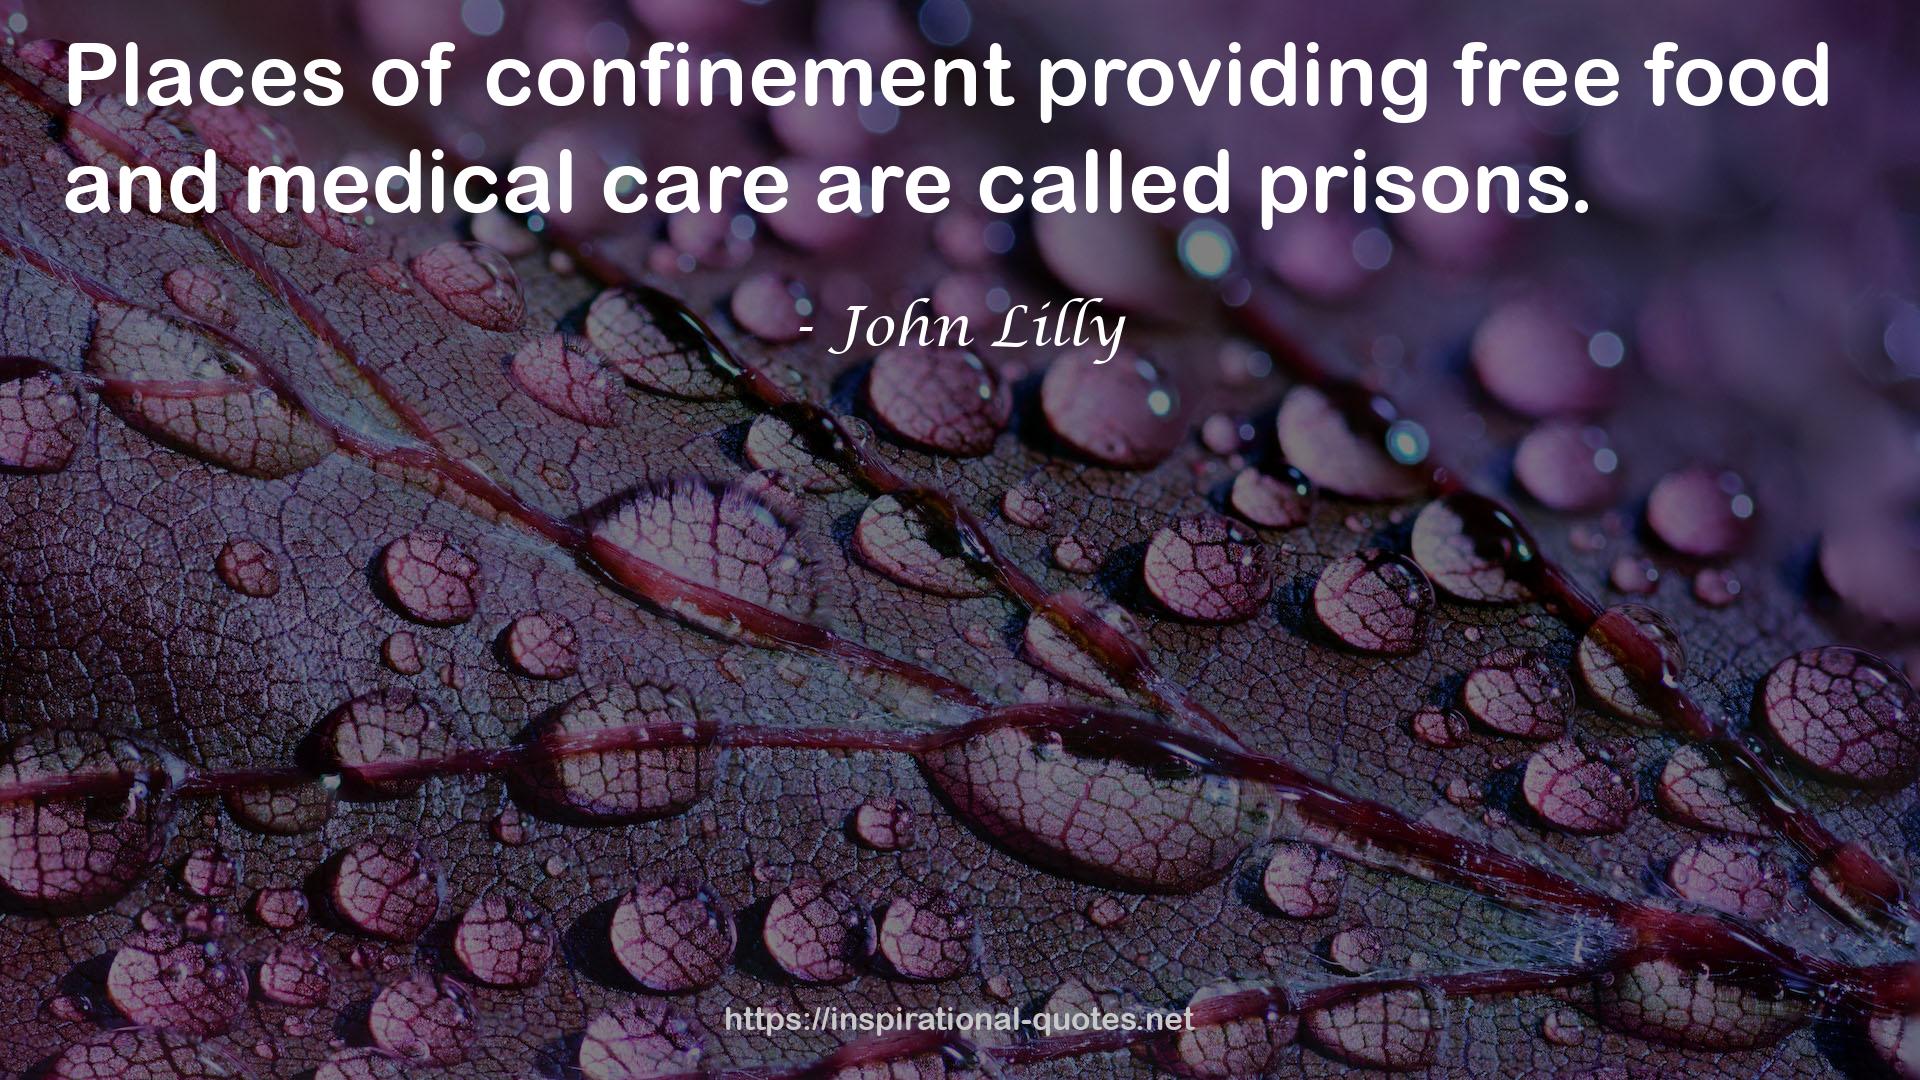 John Lilly QUOTES